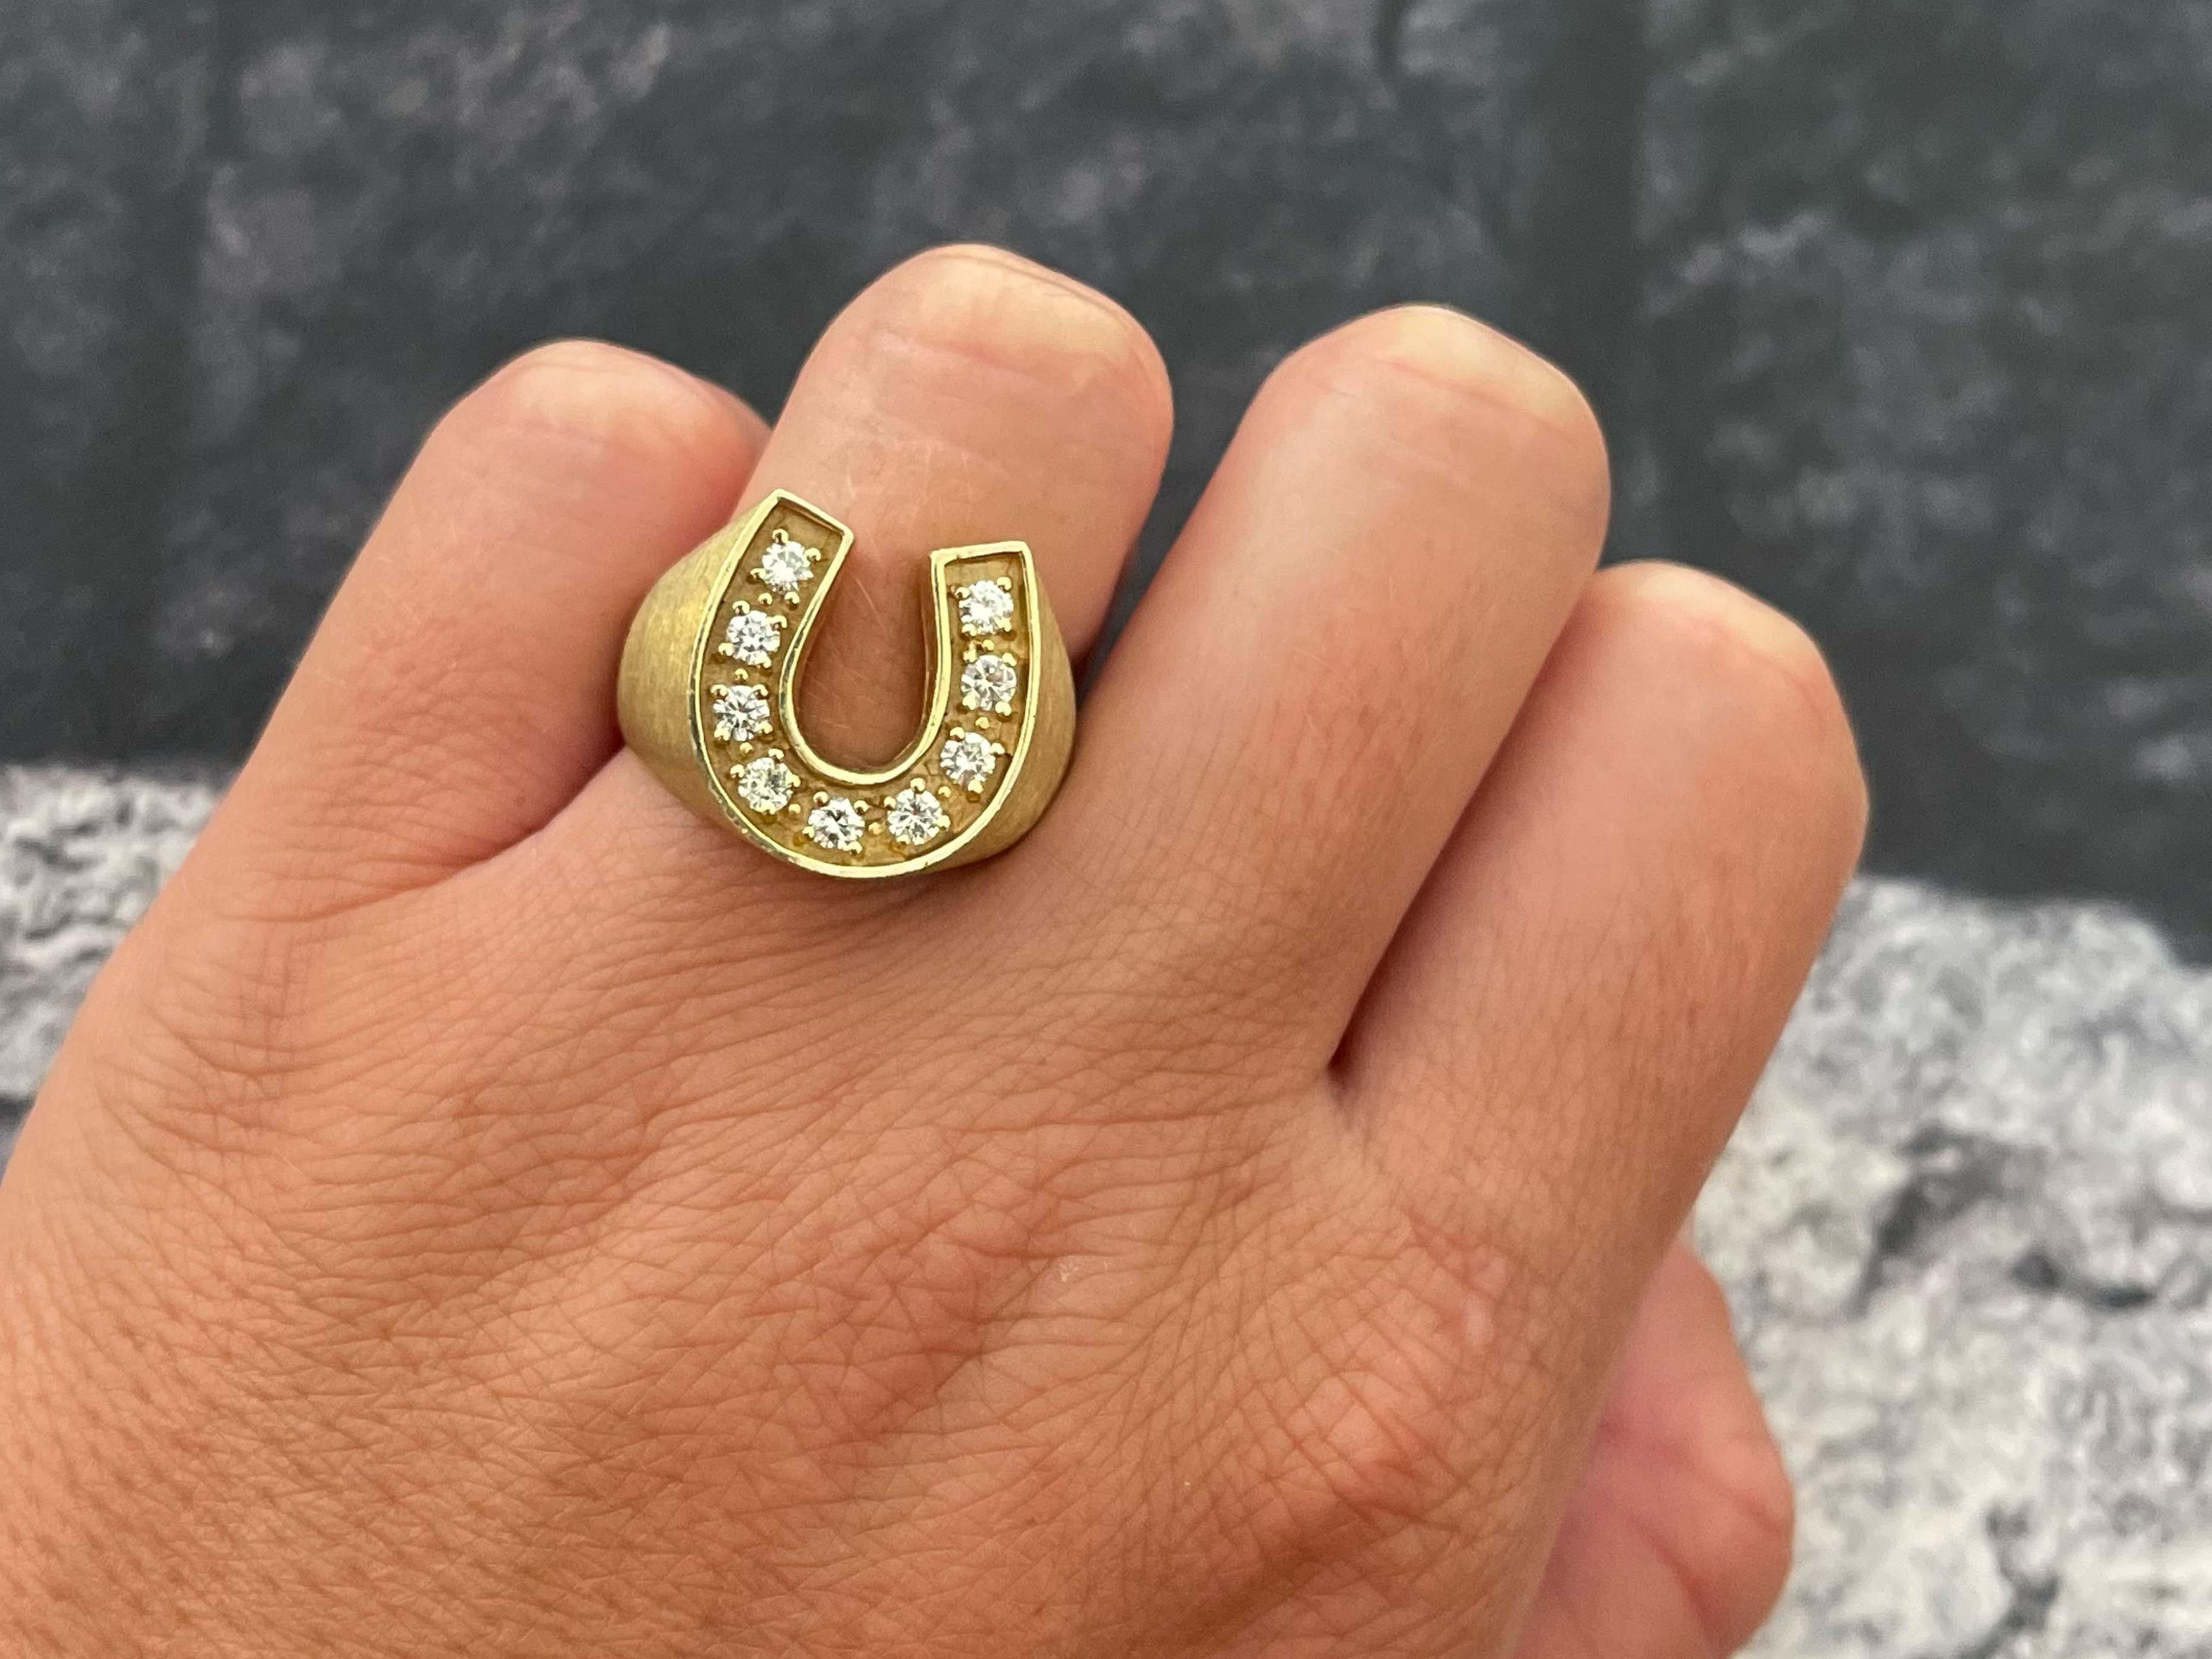 Item Specifications:

Metal: 14k Yellow Gold

Style: Statement Ring

Ring Size: 9 (resizing available for a fee)
​
​Ring Height: 17.16 mm

Total Weight: 10.3 Grams

Gemstone Specifications: 9 brilliant cut diamonds

Diamond Carat Weight: 0.50